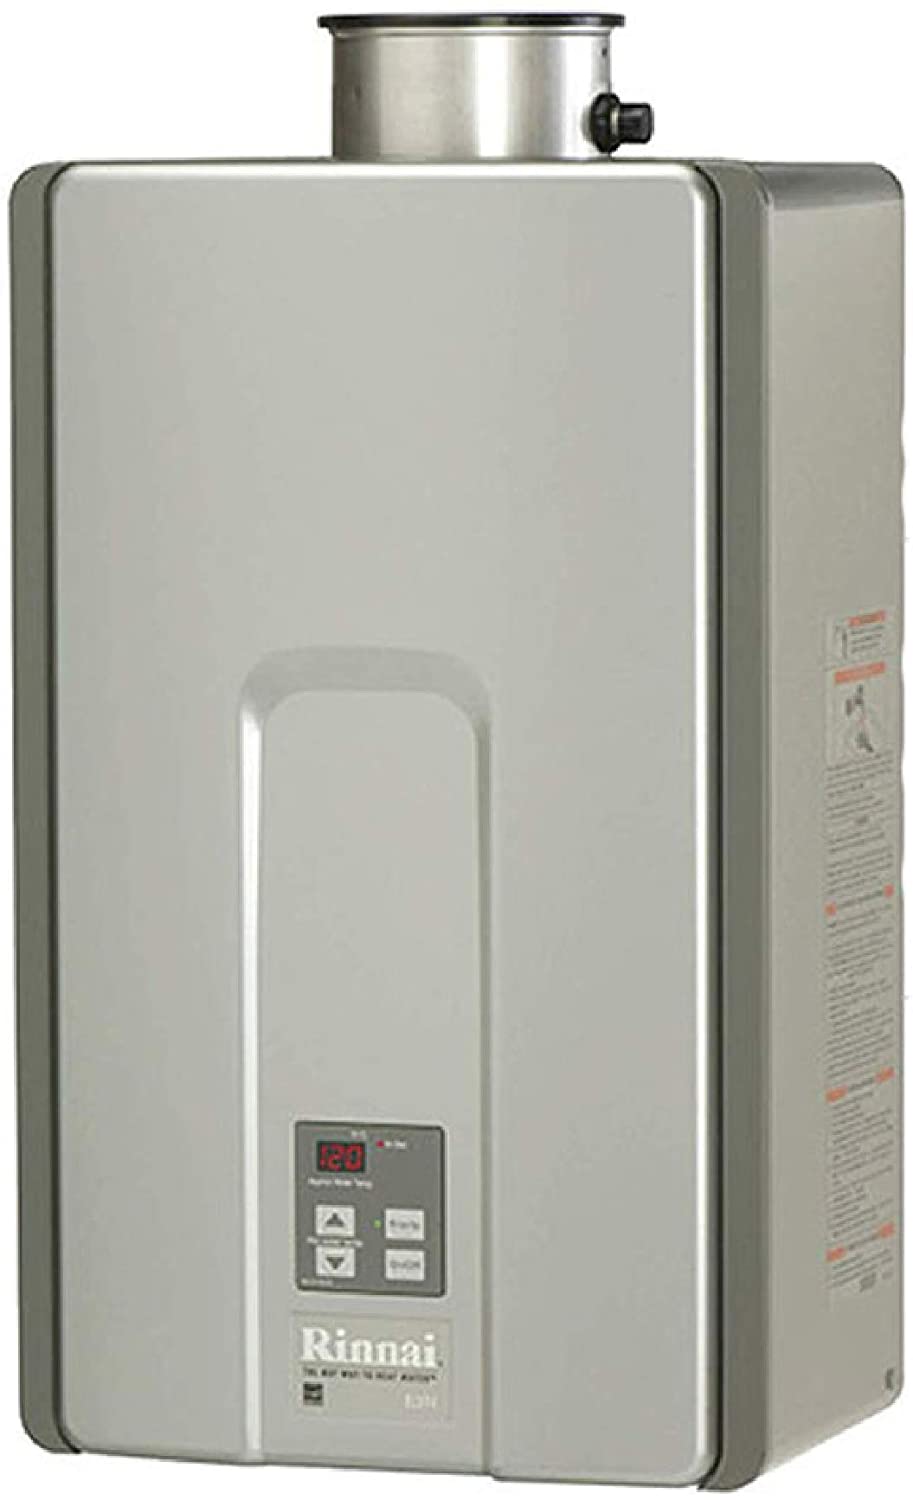 Rinnai RLX94iN Natural Gas Tankless Hot Water Heater